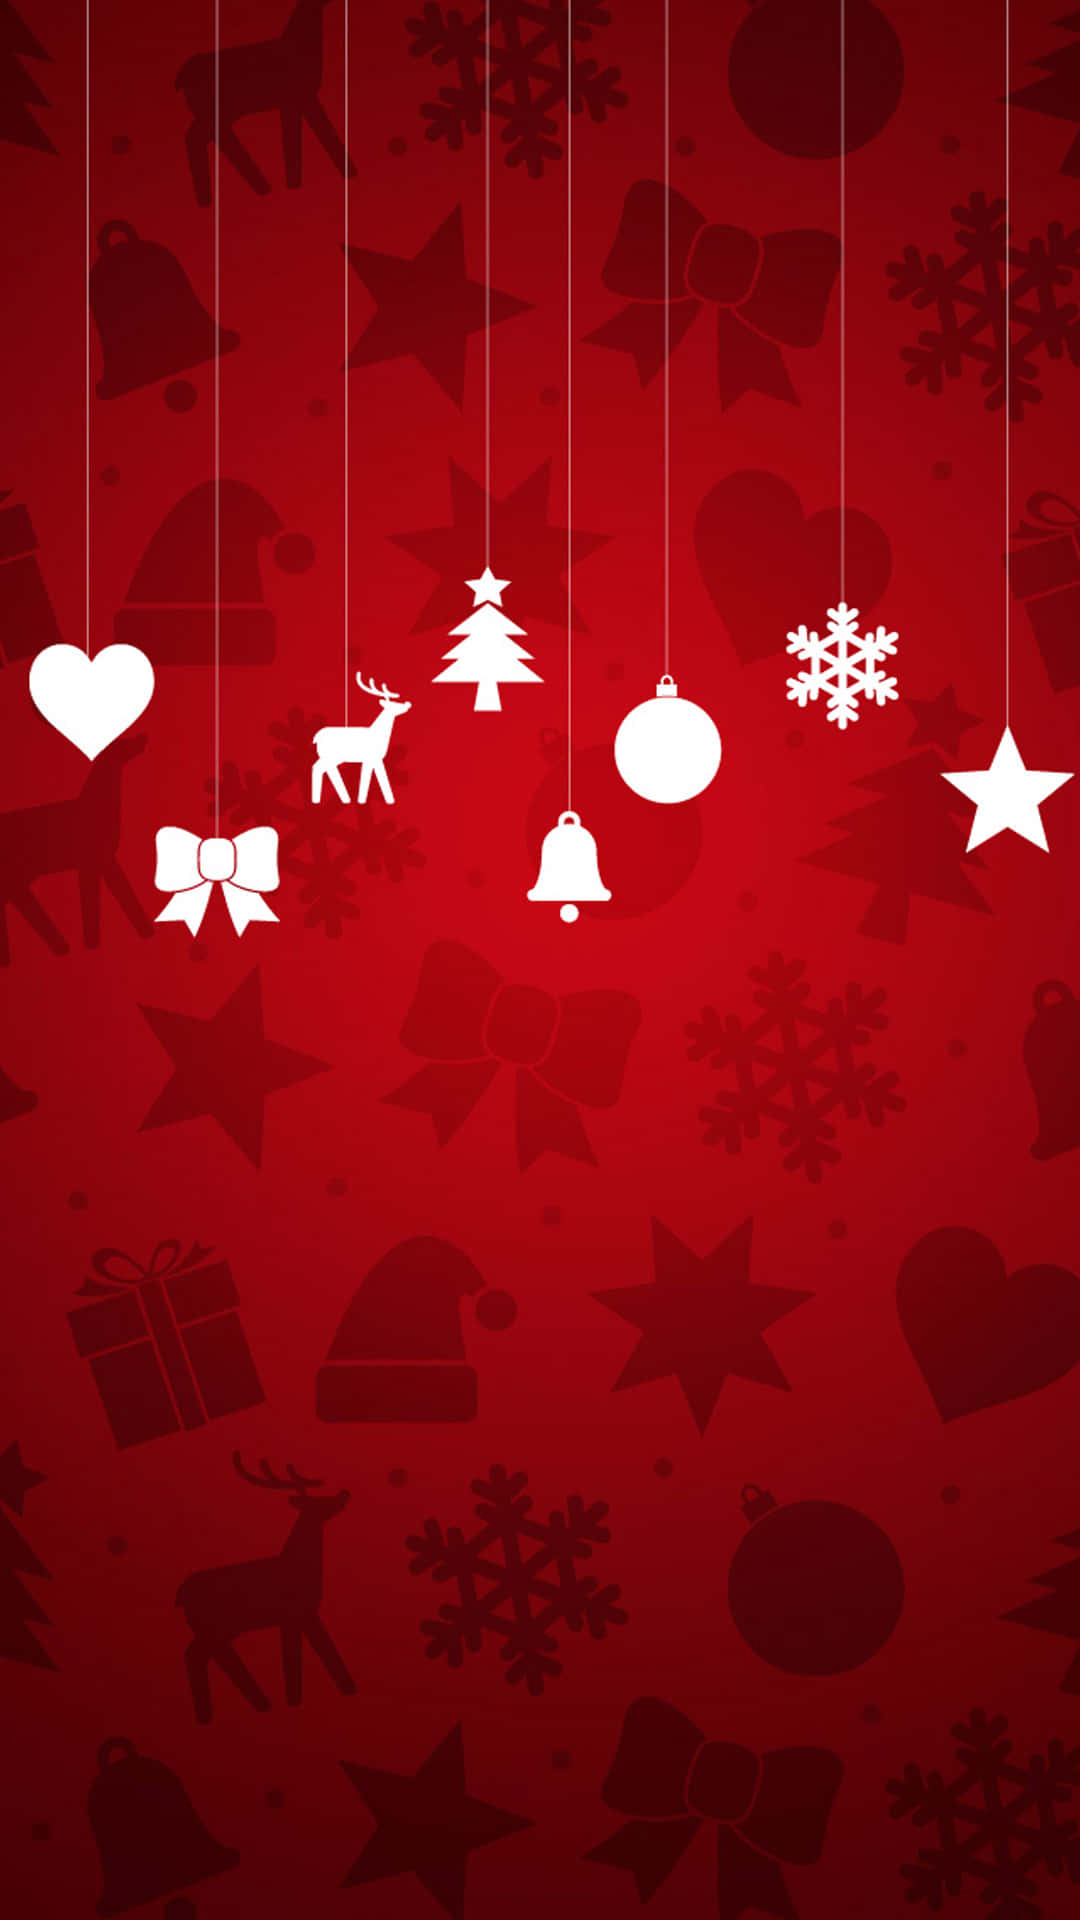 Christmas Decorations On A Red Background